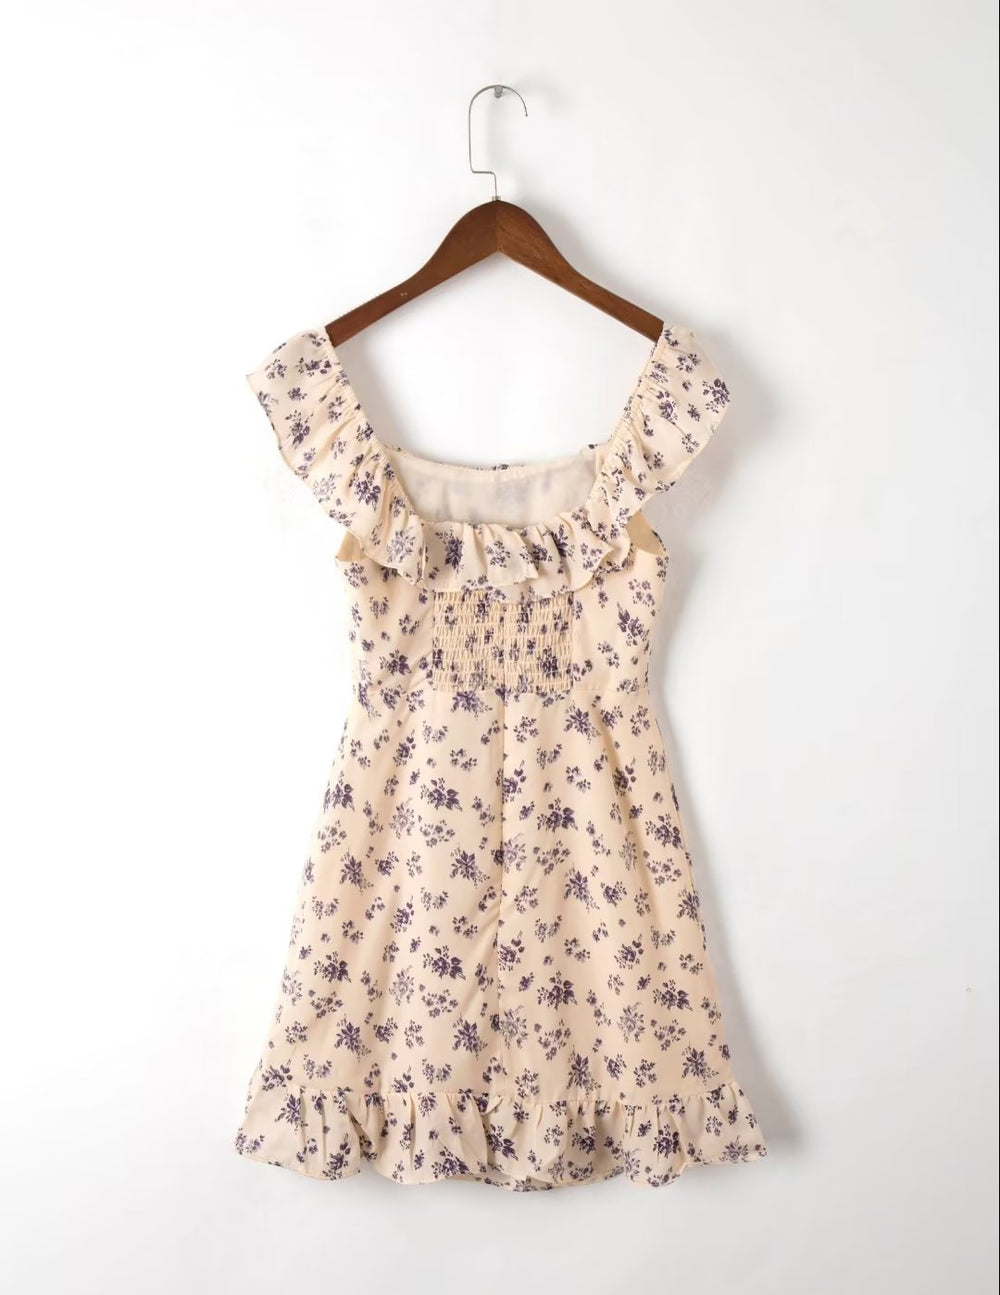 Spring French Square Neck Cinched Ruffled Floral A Line Sleeveless Strap Dress